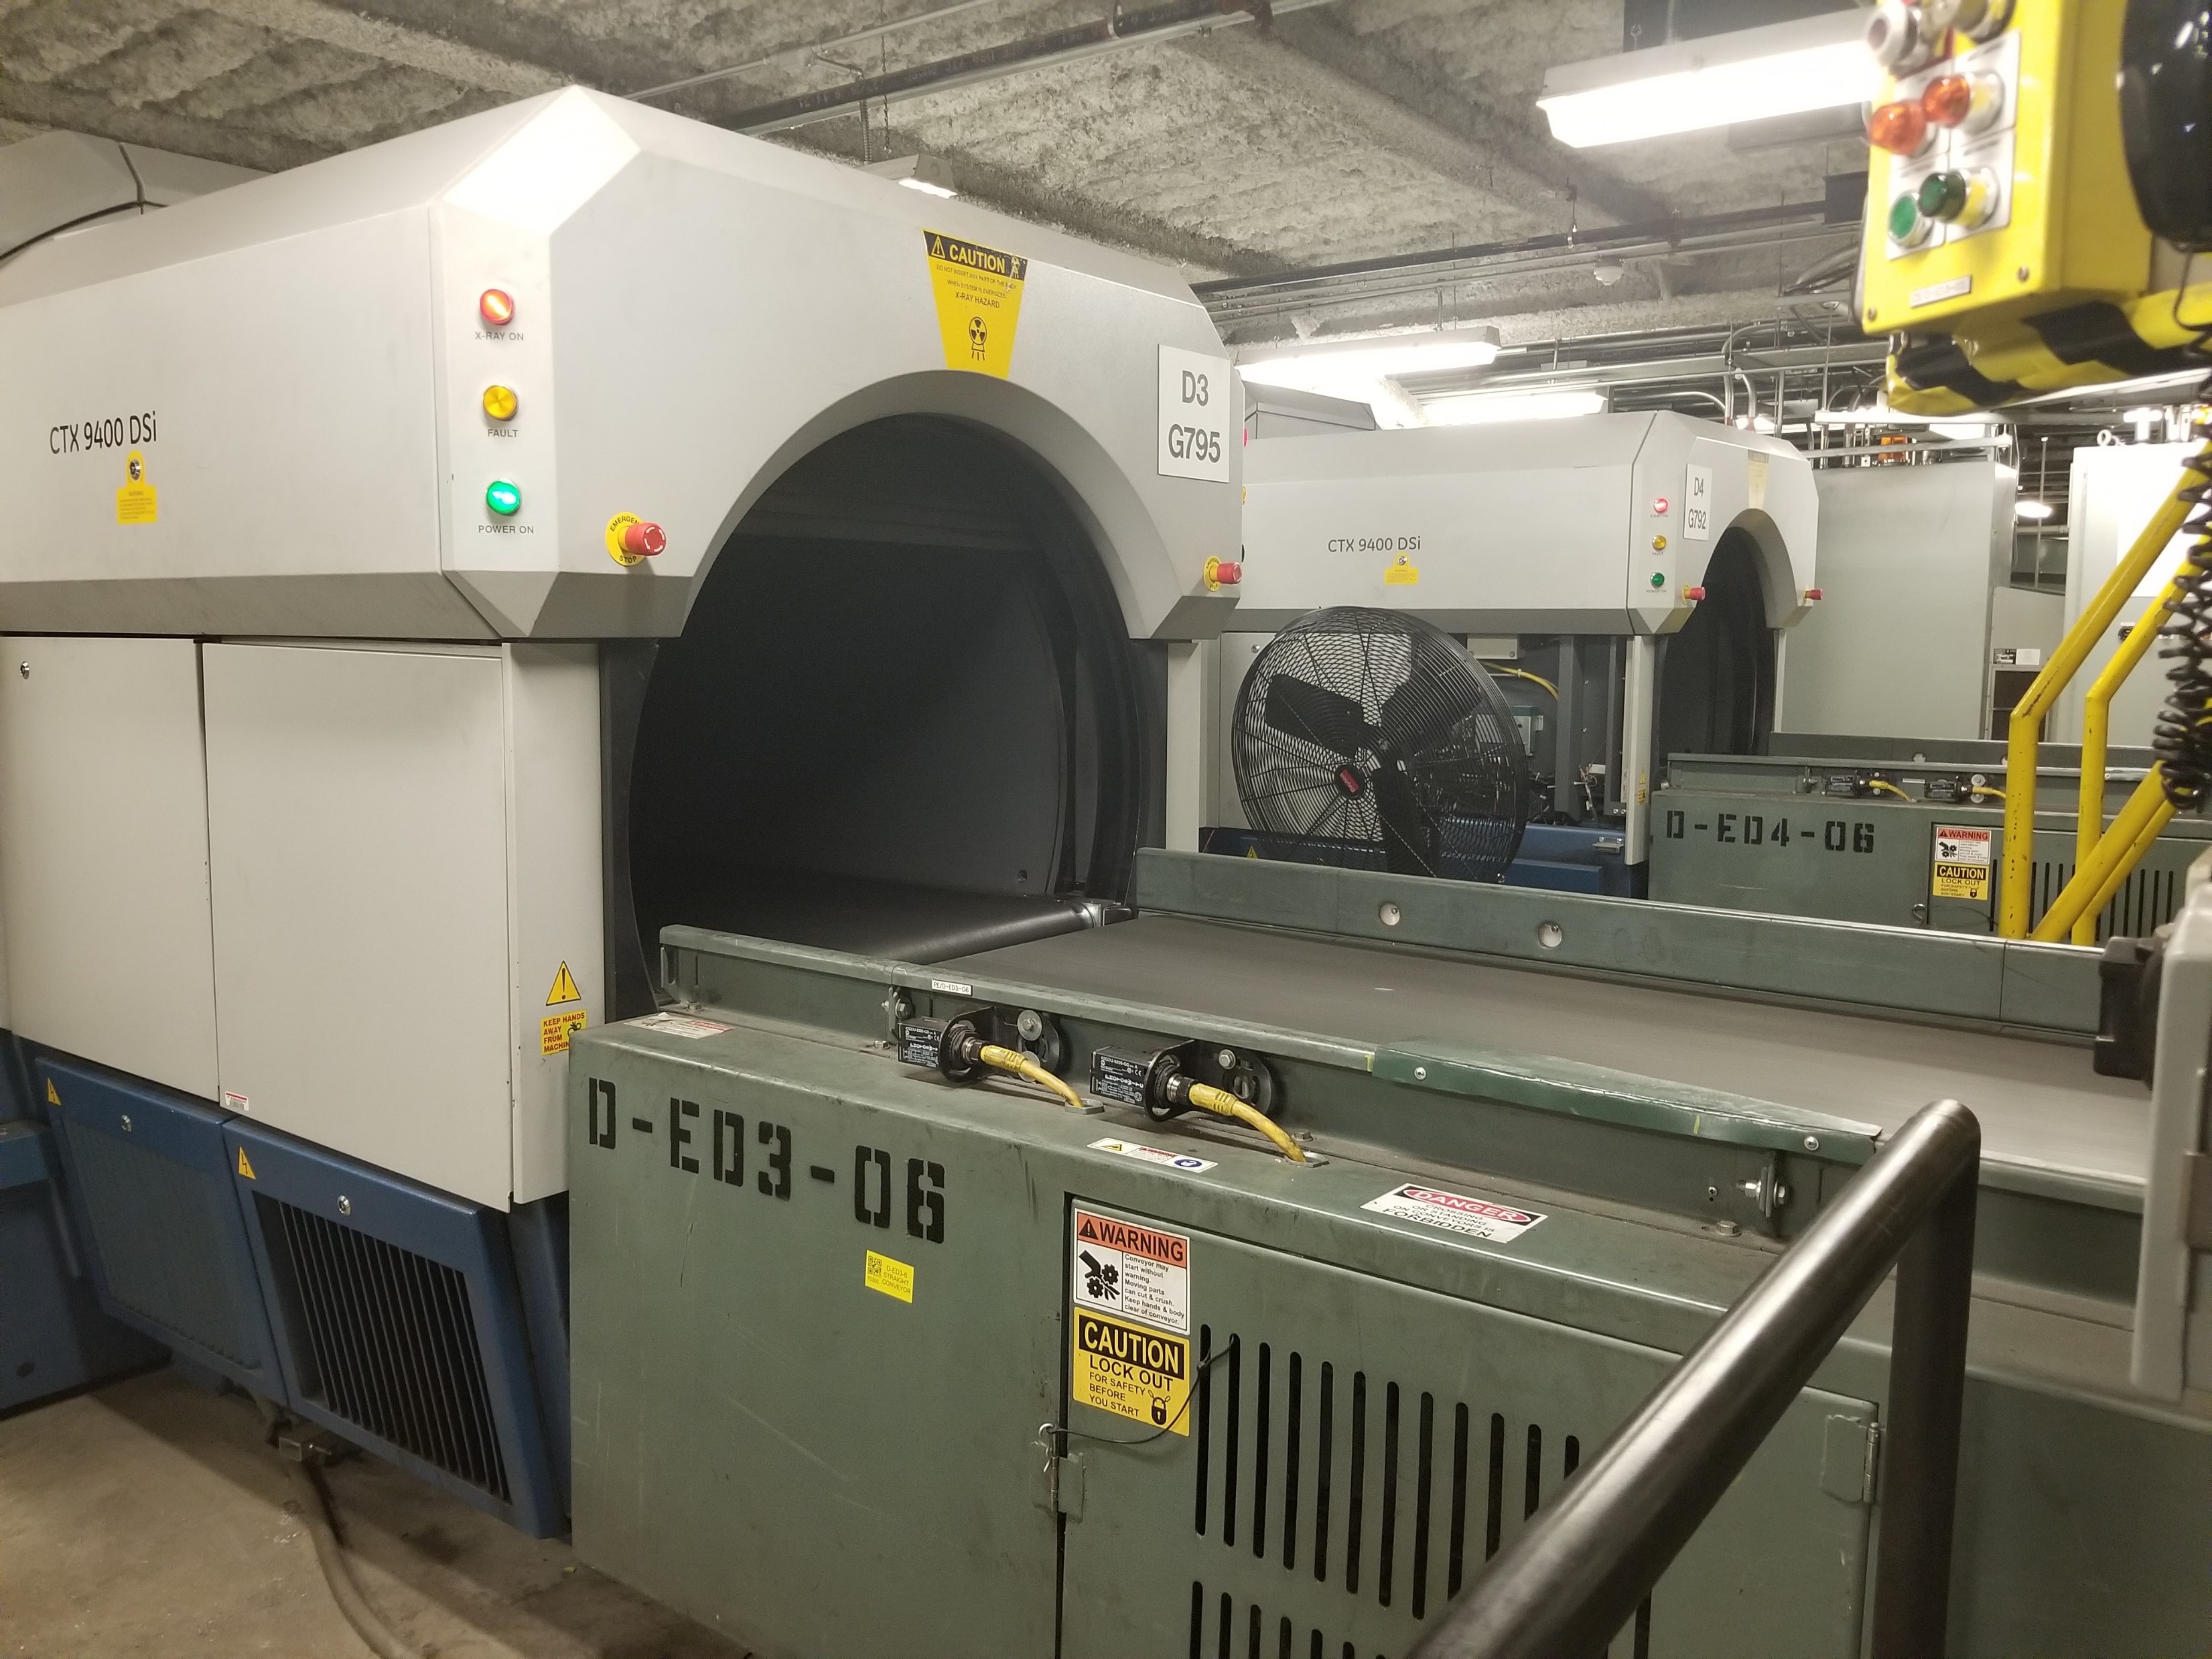 Older EDS machines that scan checked baggage are being replaced with newer, more efficient ones